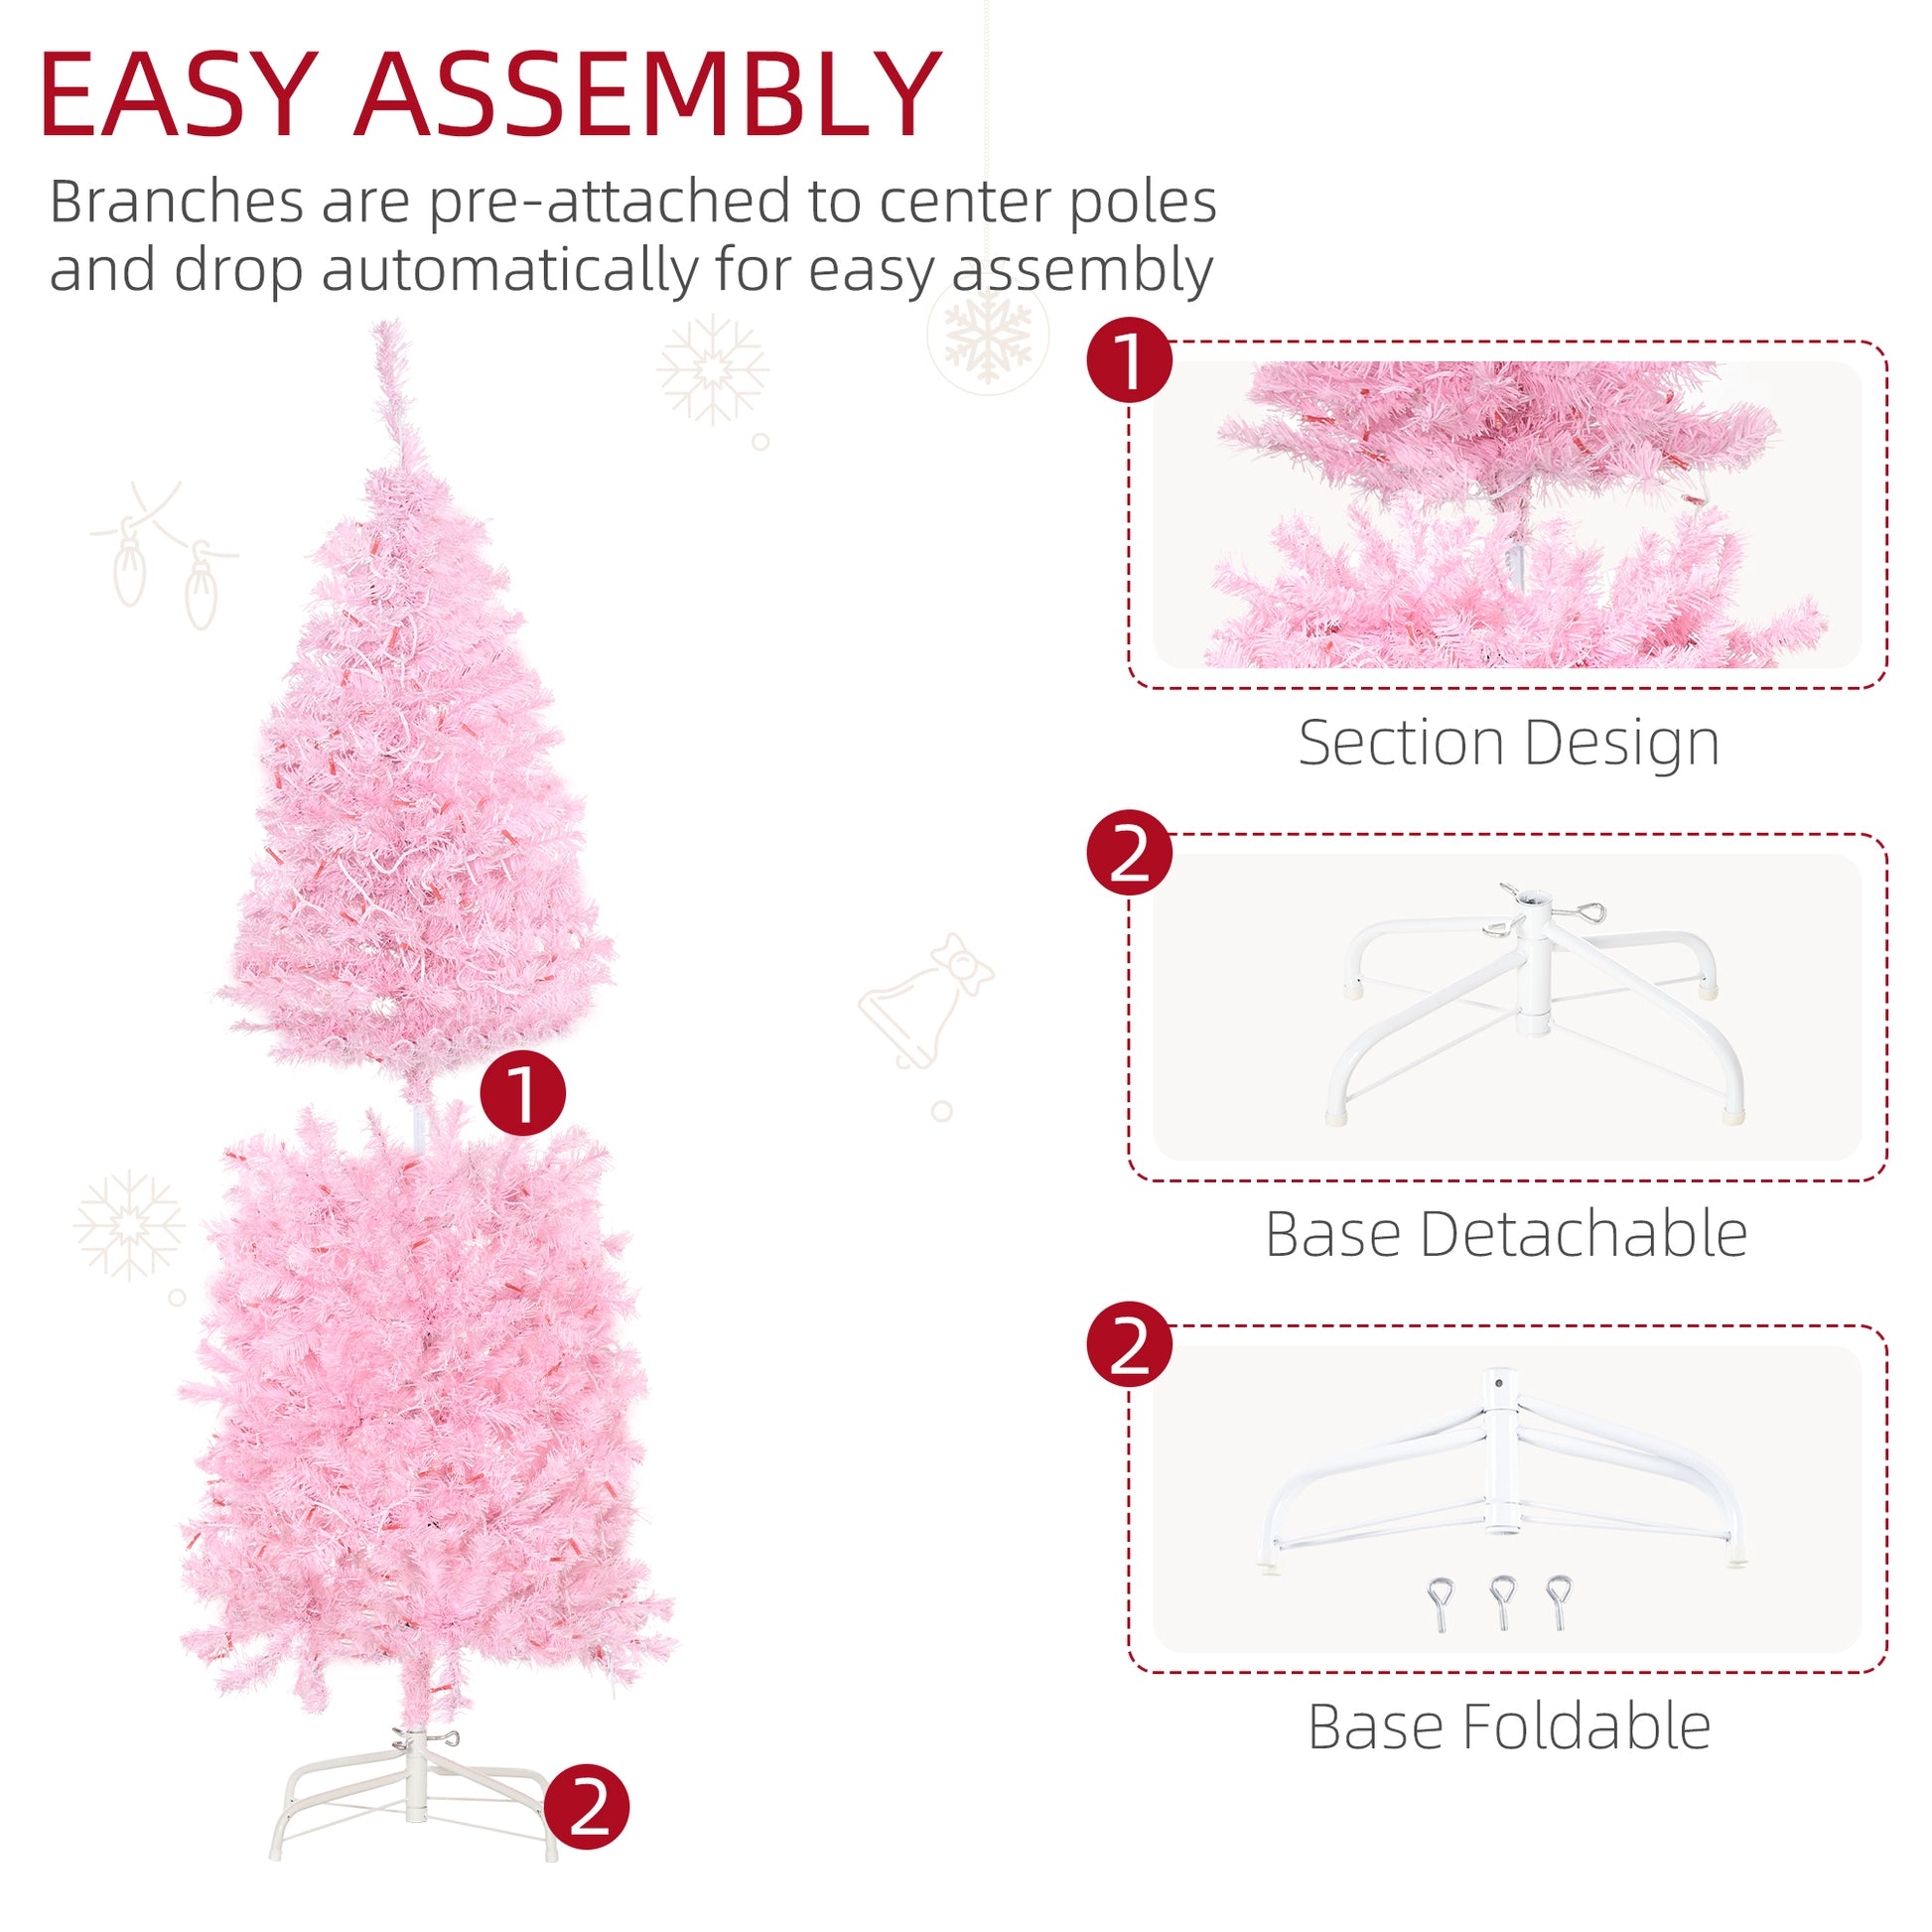 Homcom 5FT Tall Prelit Pencil Slim Artificial Christmas Tree with Realistic Branches